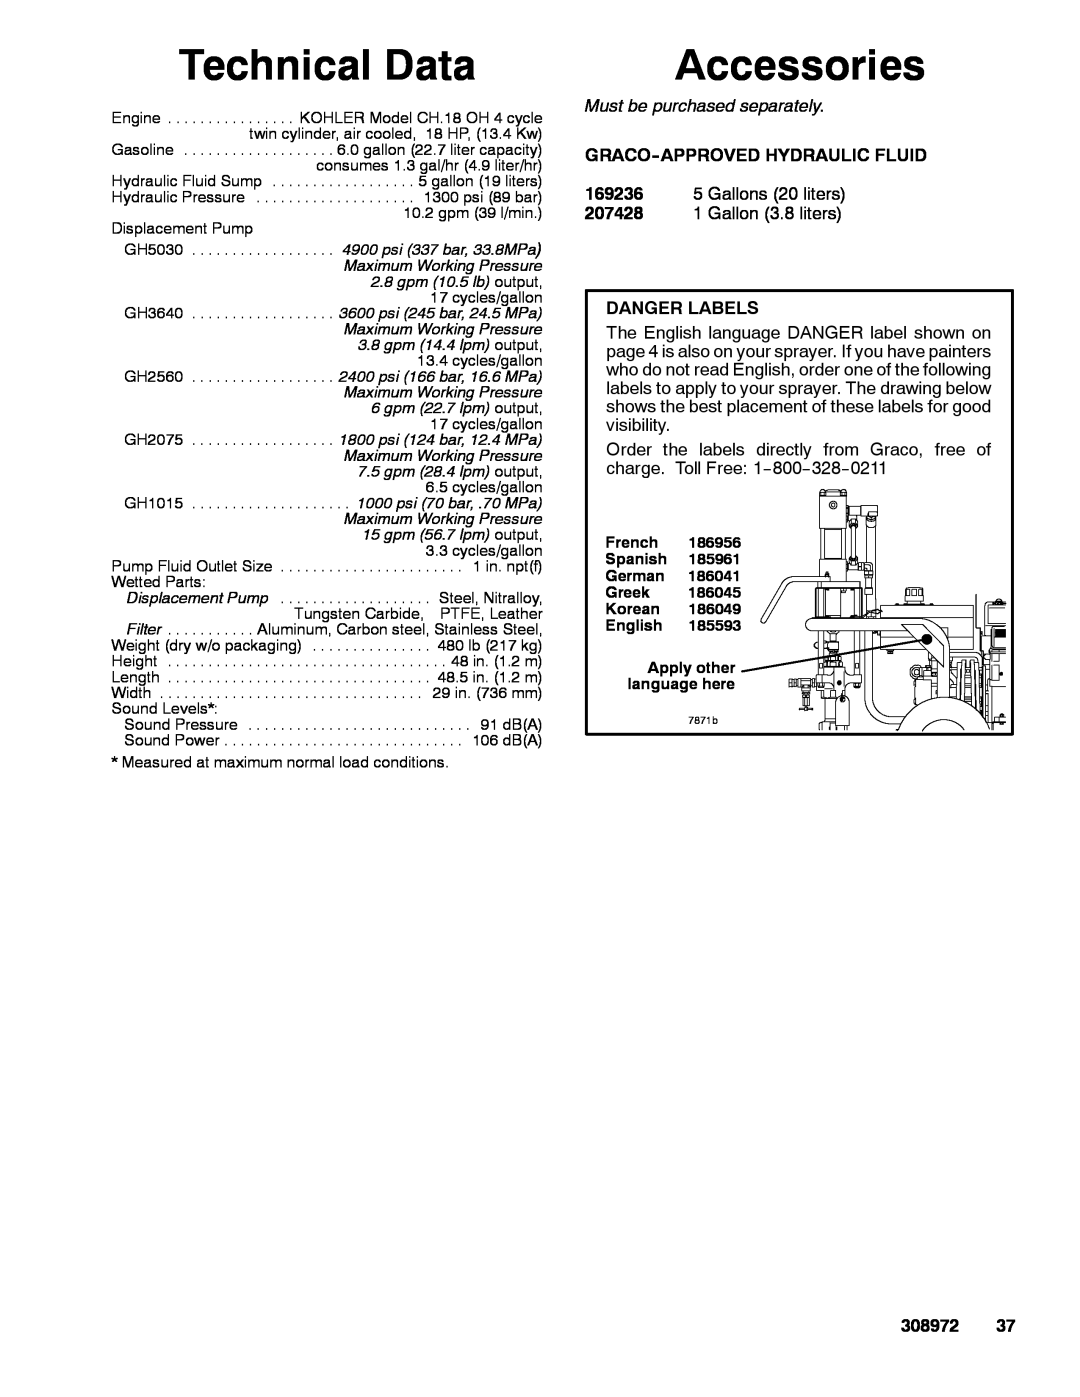 Graco Inc 687100 Technical Data, Accessories, Must be purchased separately, Graco--Approved Hydraulic Fluid, Danger Labels 